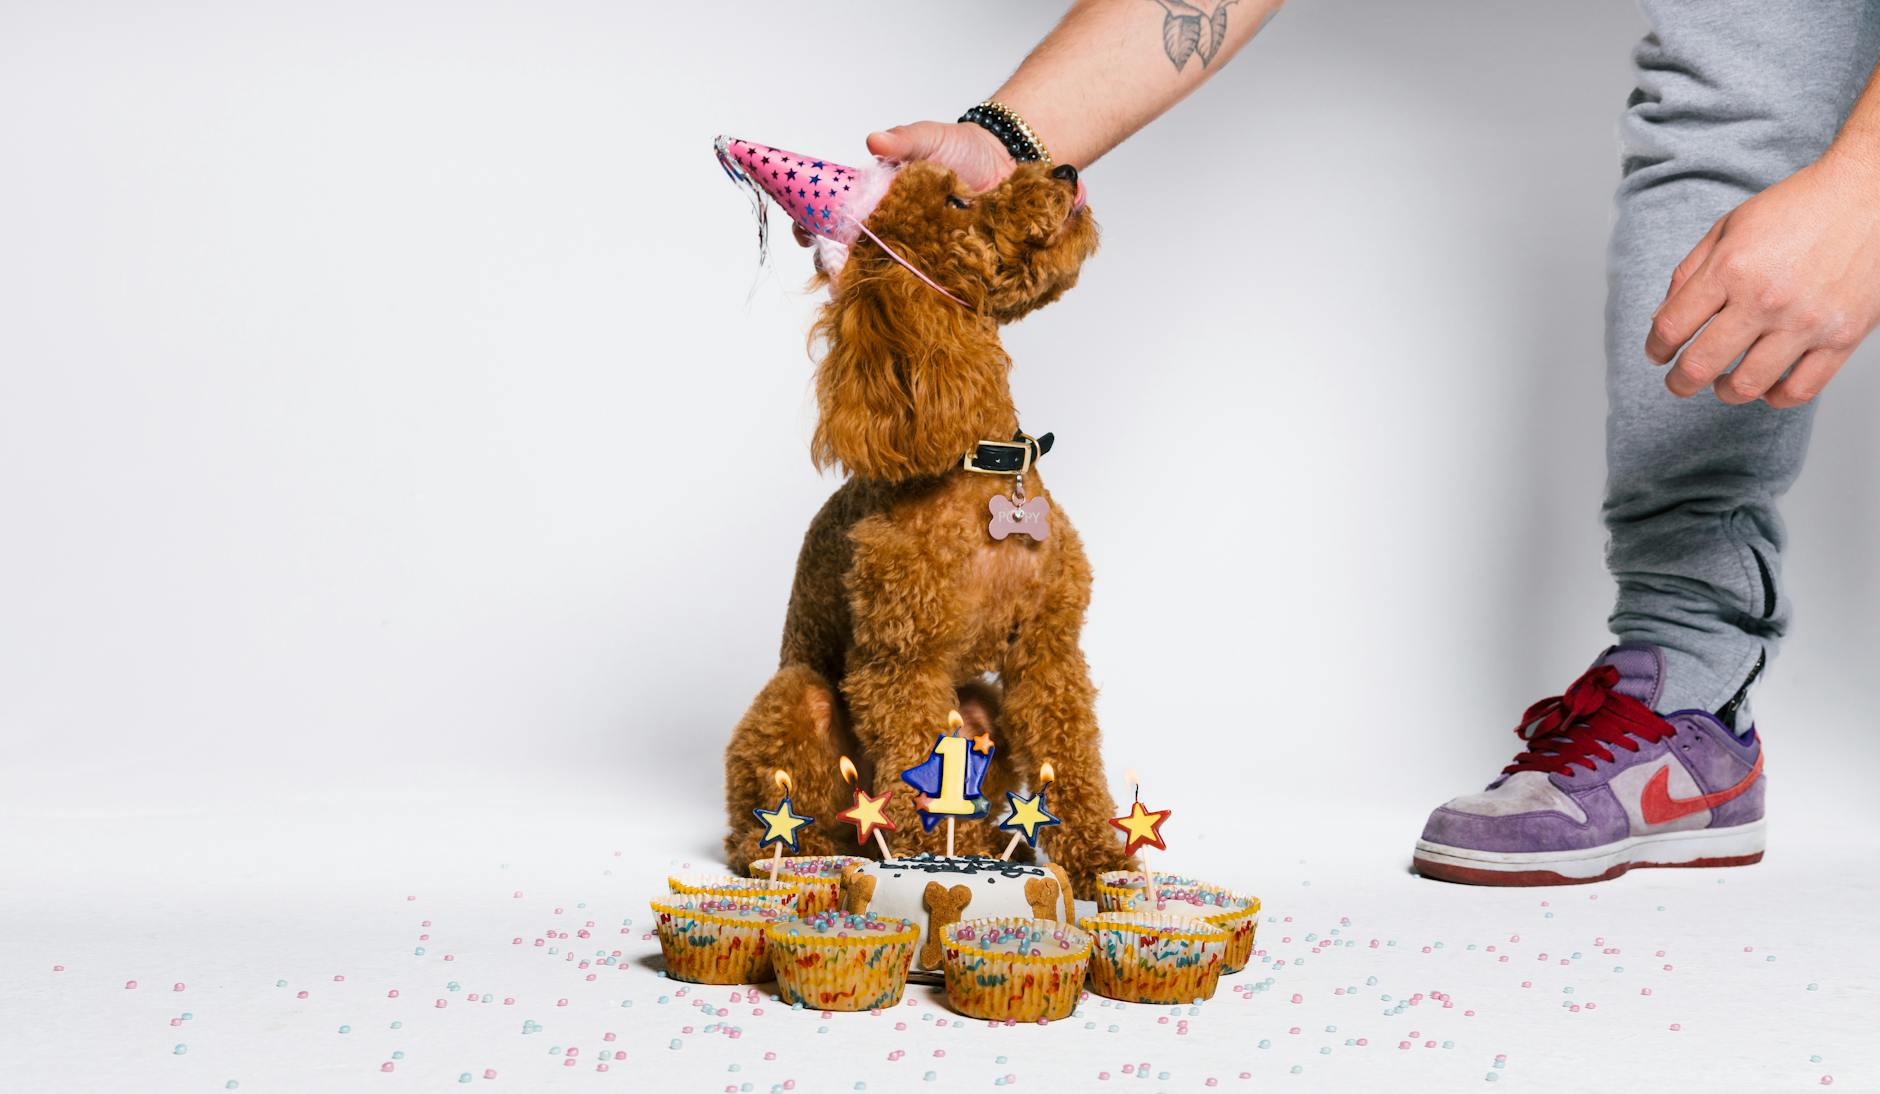 A dog is being fed cake and a birthday hat